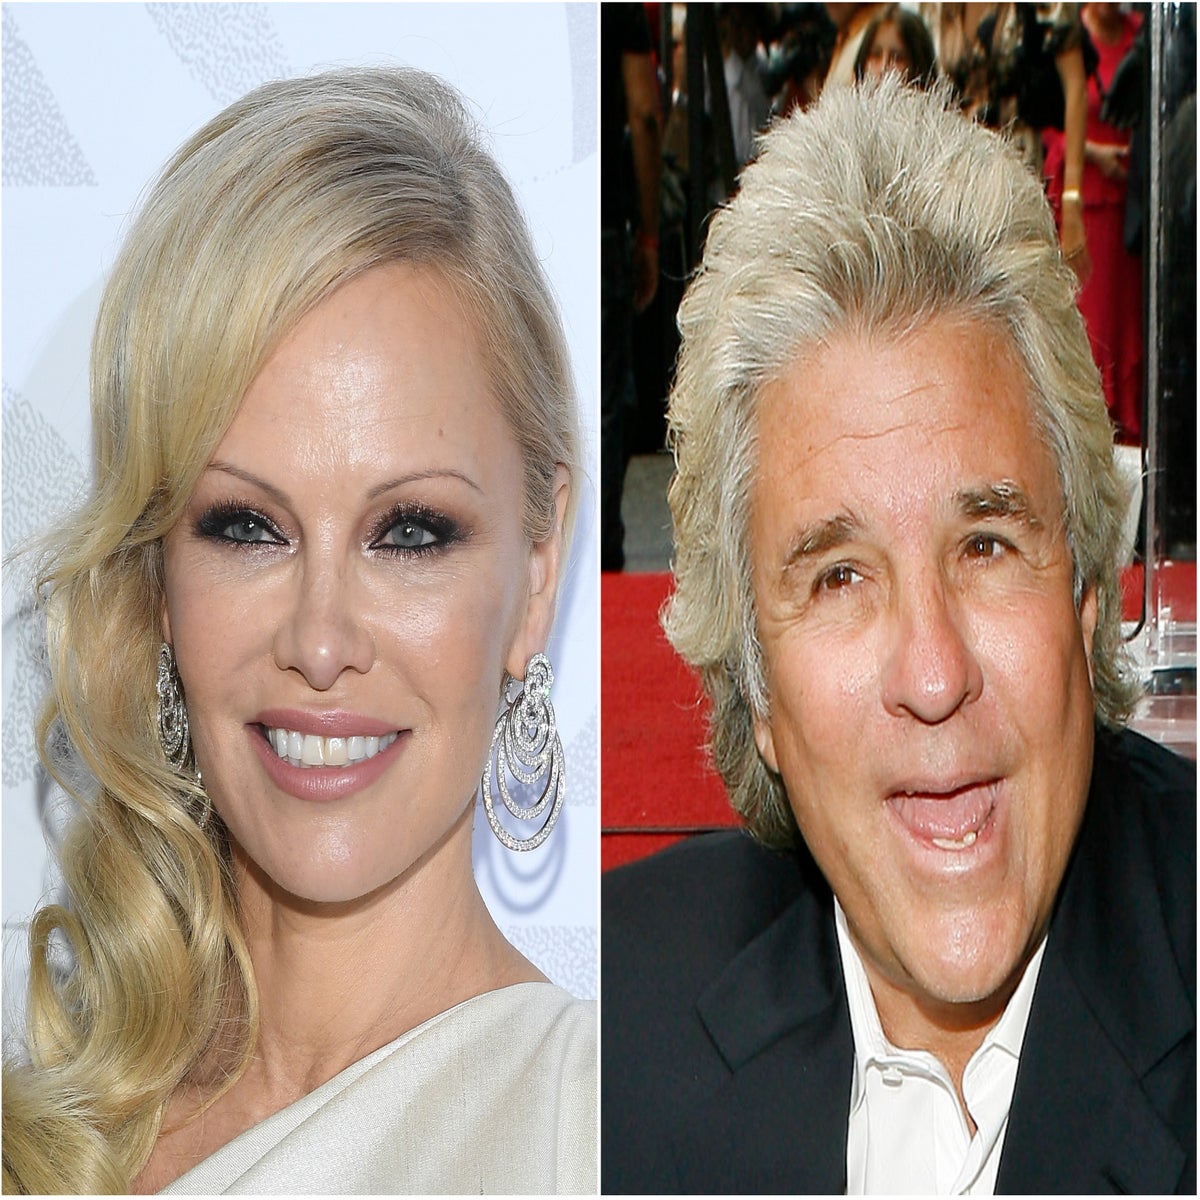 Pamela Anderson's ex-husband of 12 days, Jon Peters, vows to leave